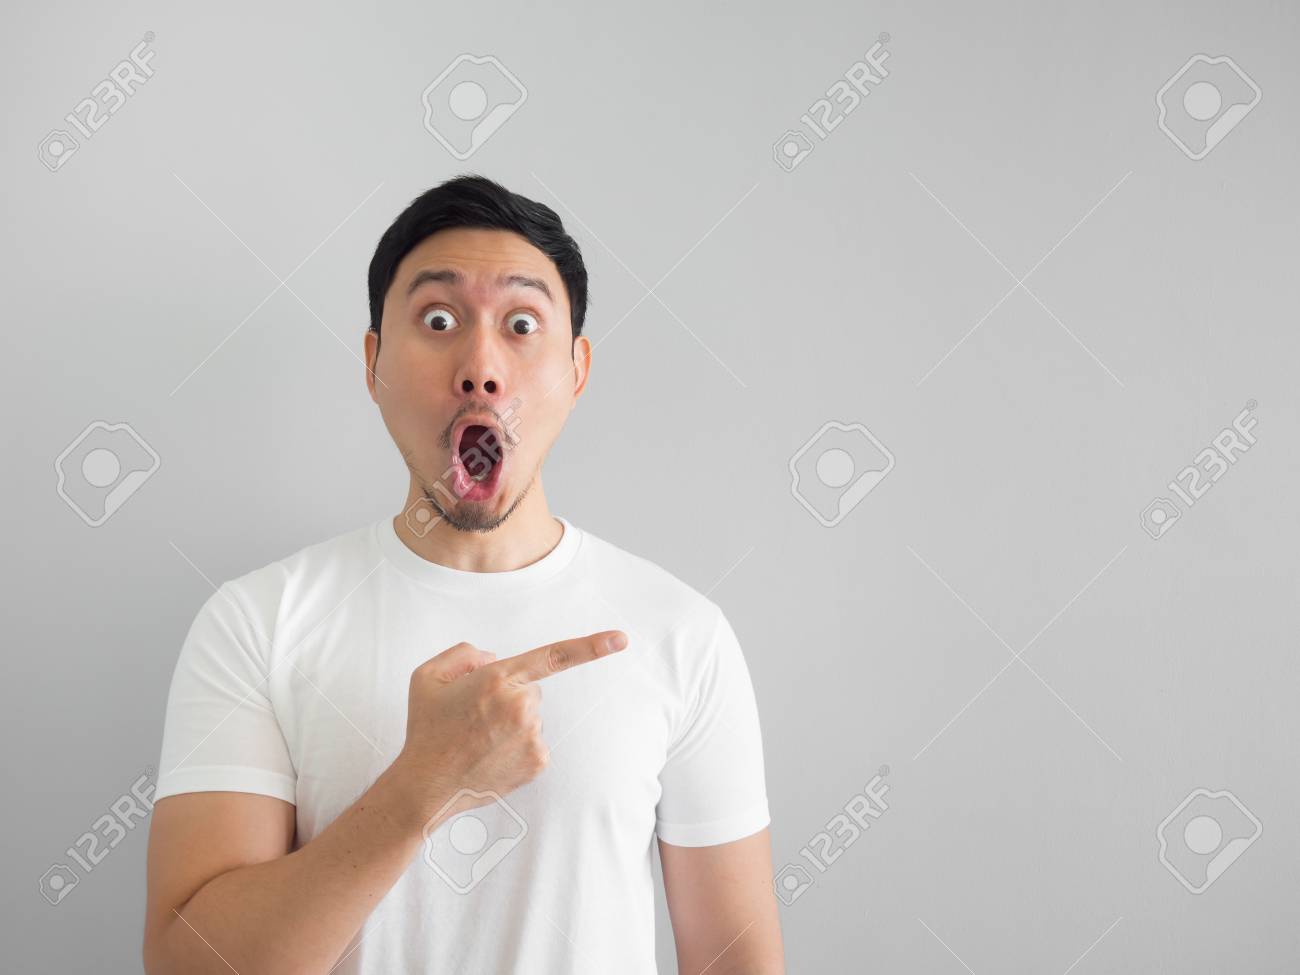 Shocked Face Of Asian Man In White Shirt On Grey Background Stock